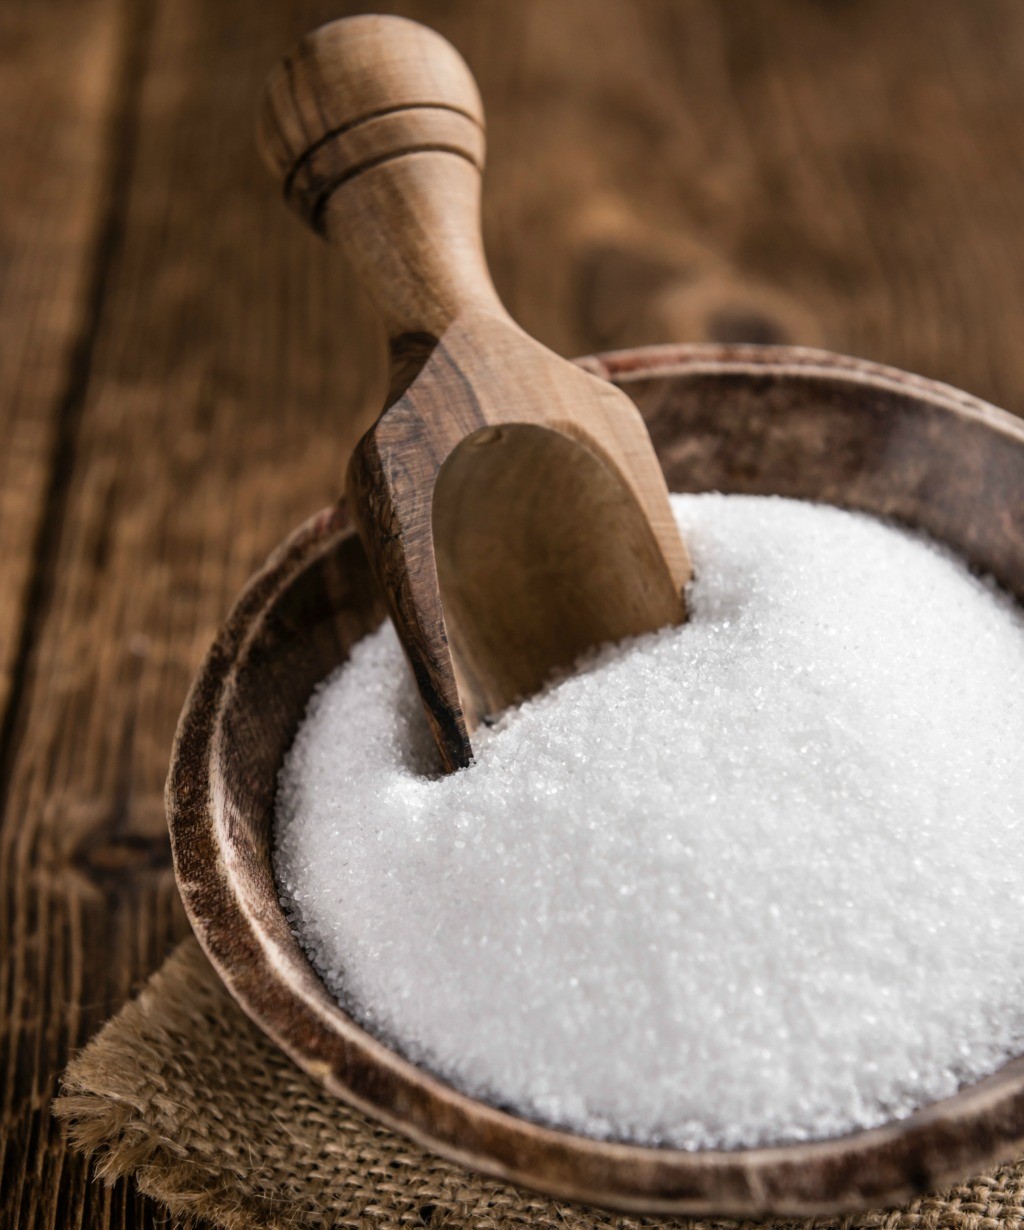 Erythritol Buying Guide